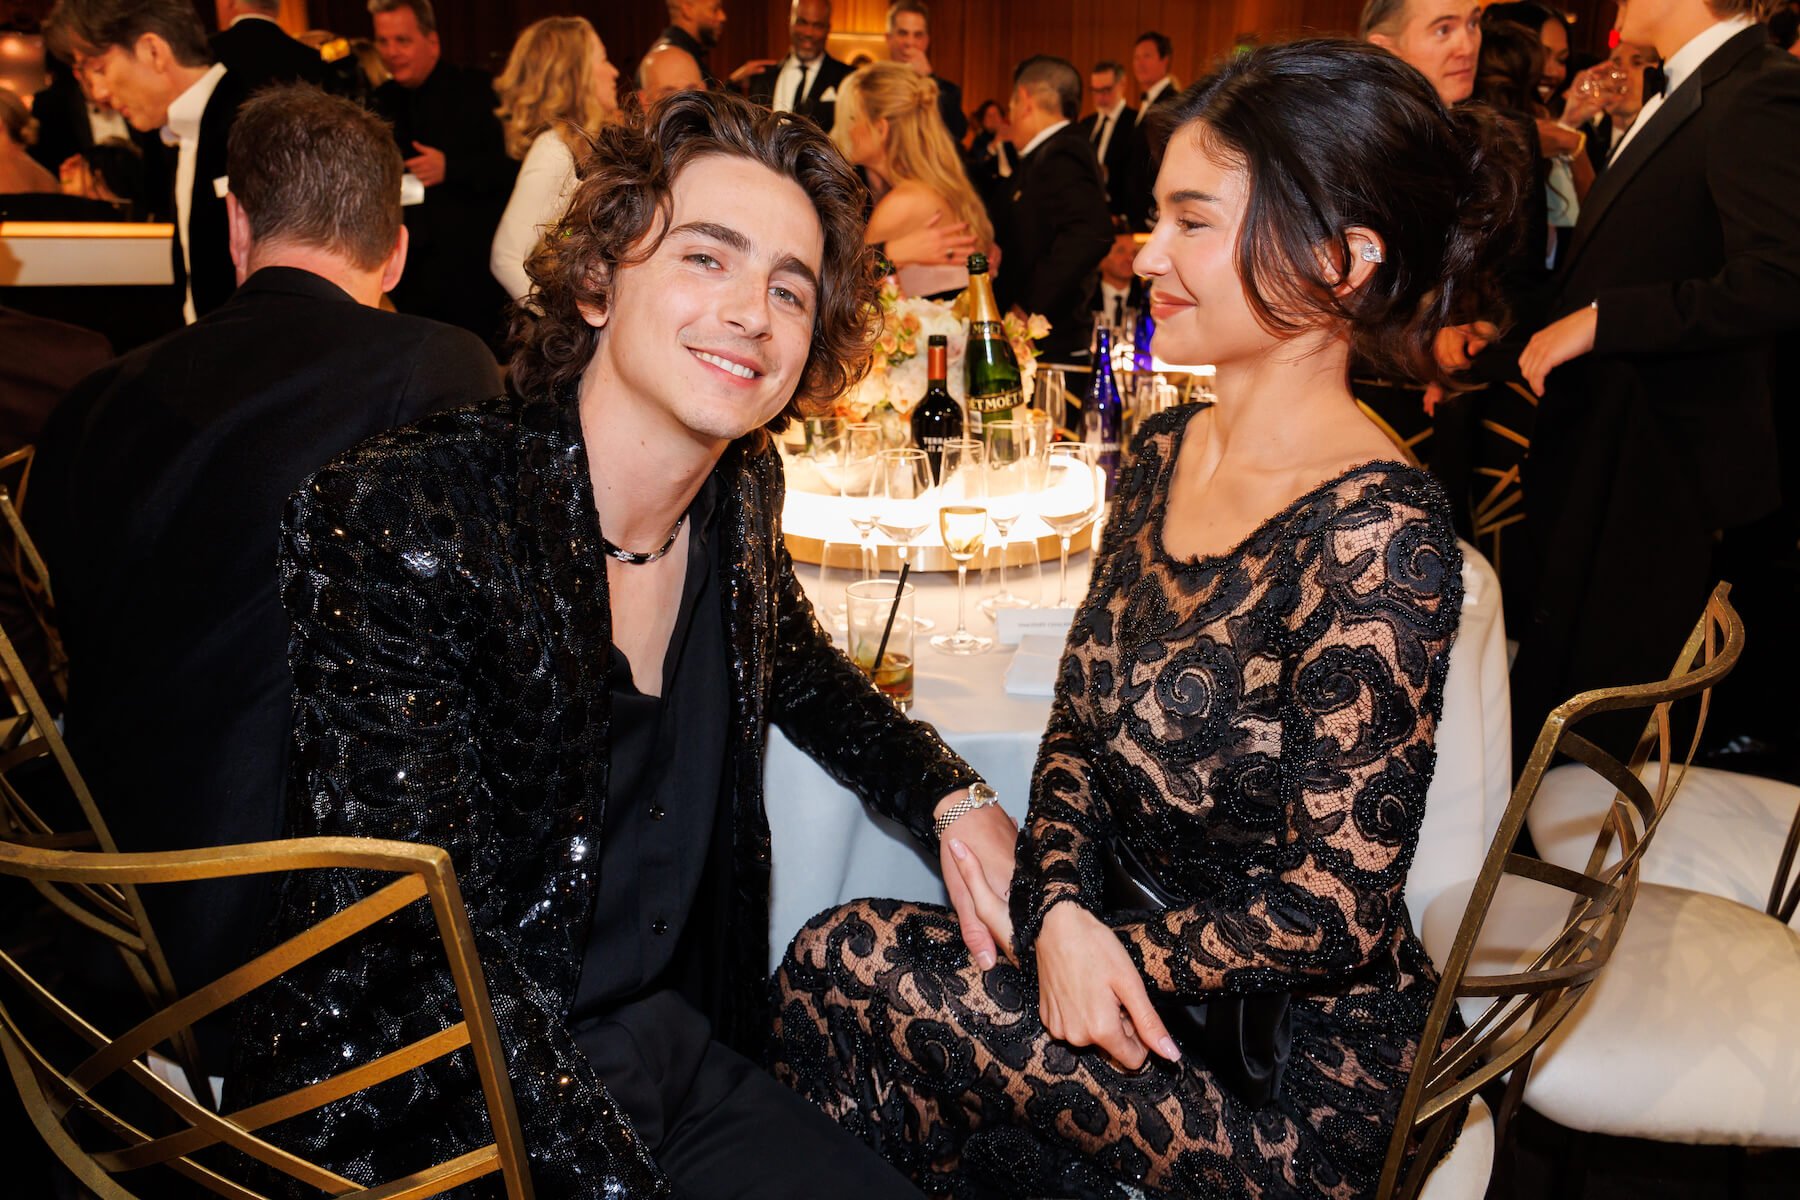 Timothée Chalamet sitting at a table at the Golden Globes and smiling at the camera while Kylie Jenner looks at him and smiles